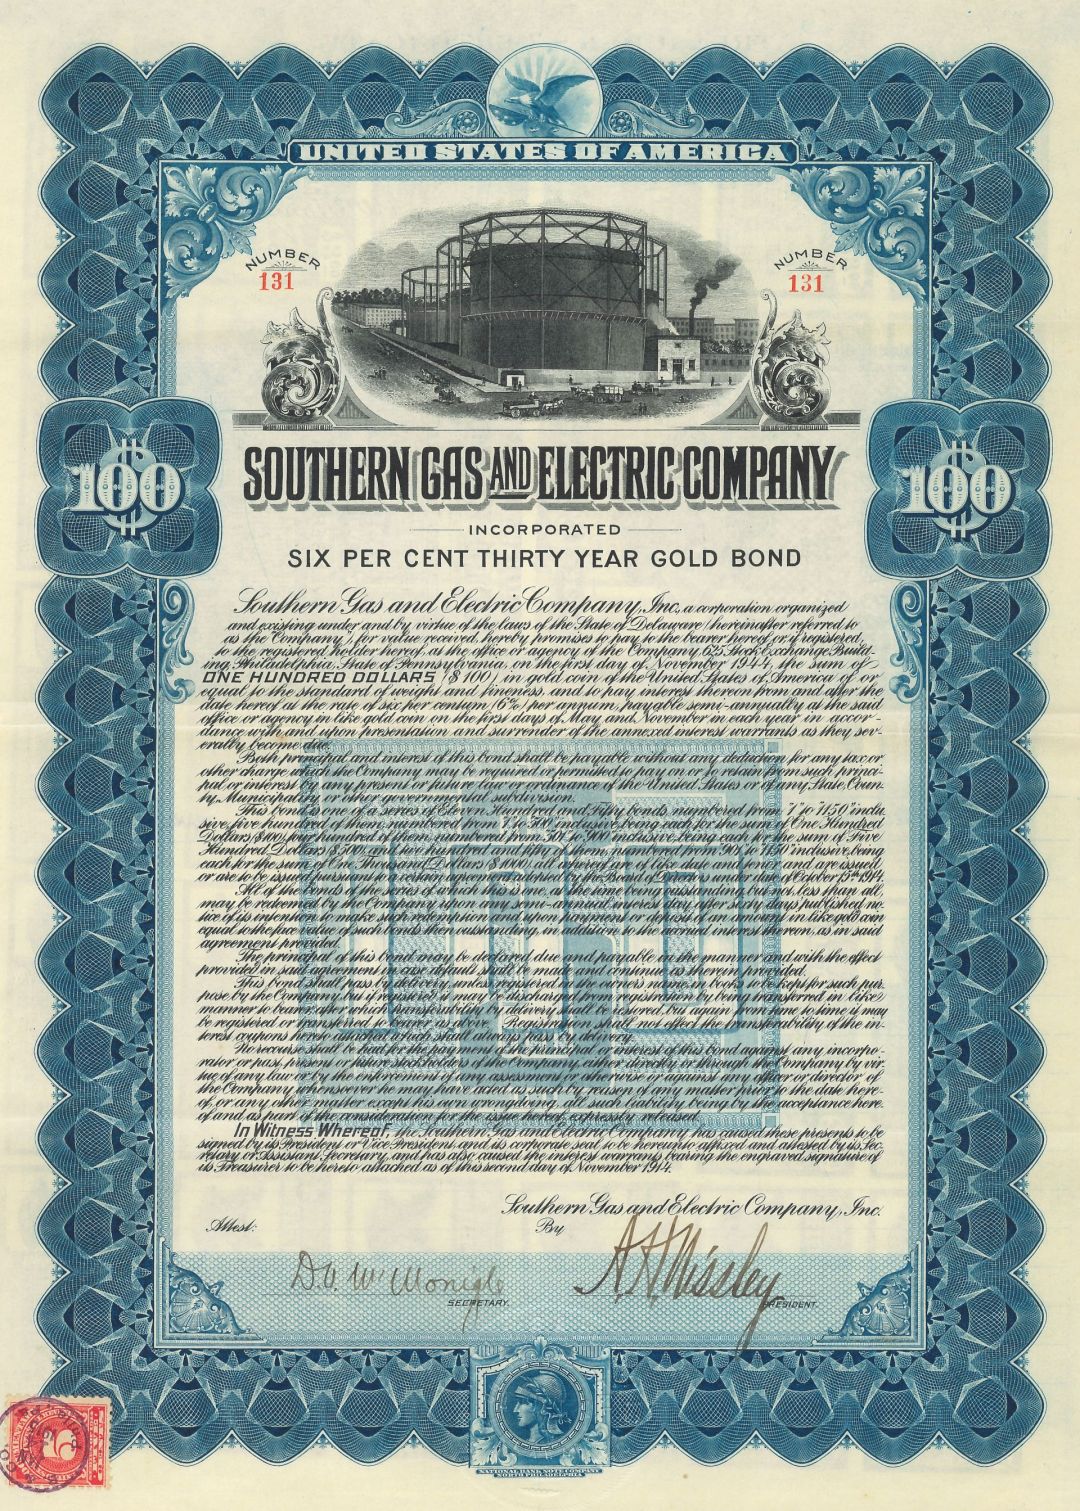 Southern Gas and Electric Co. - 1914 dated Utilities Gold Bond (Uncanceled)